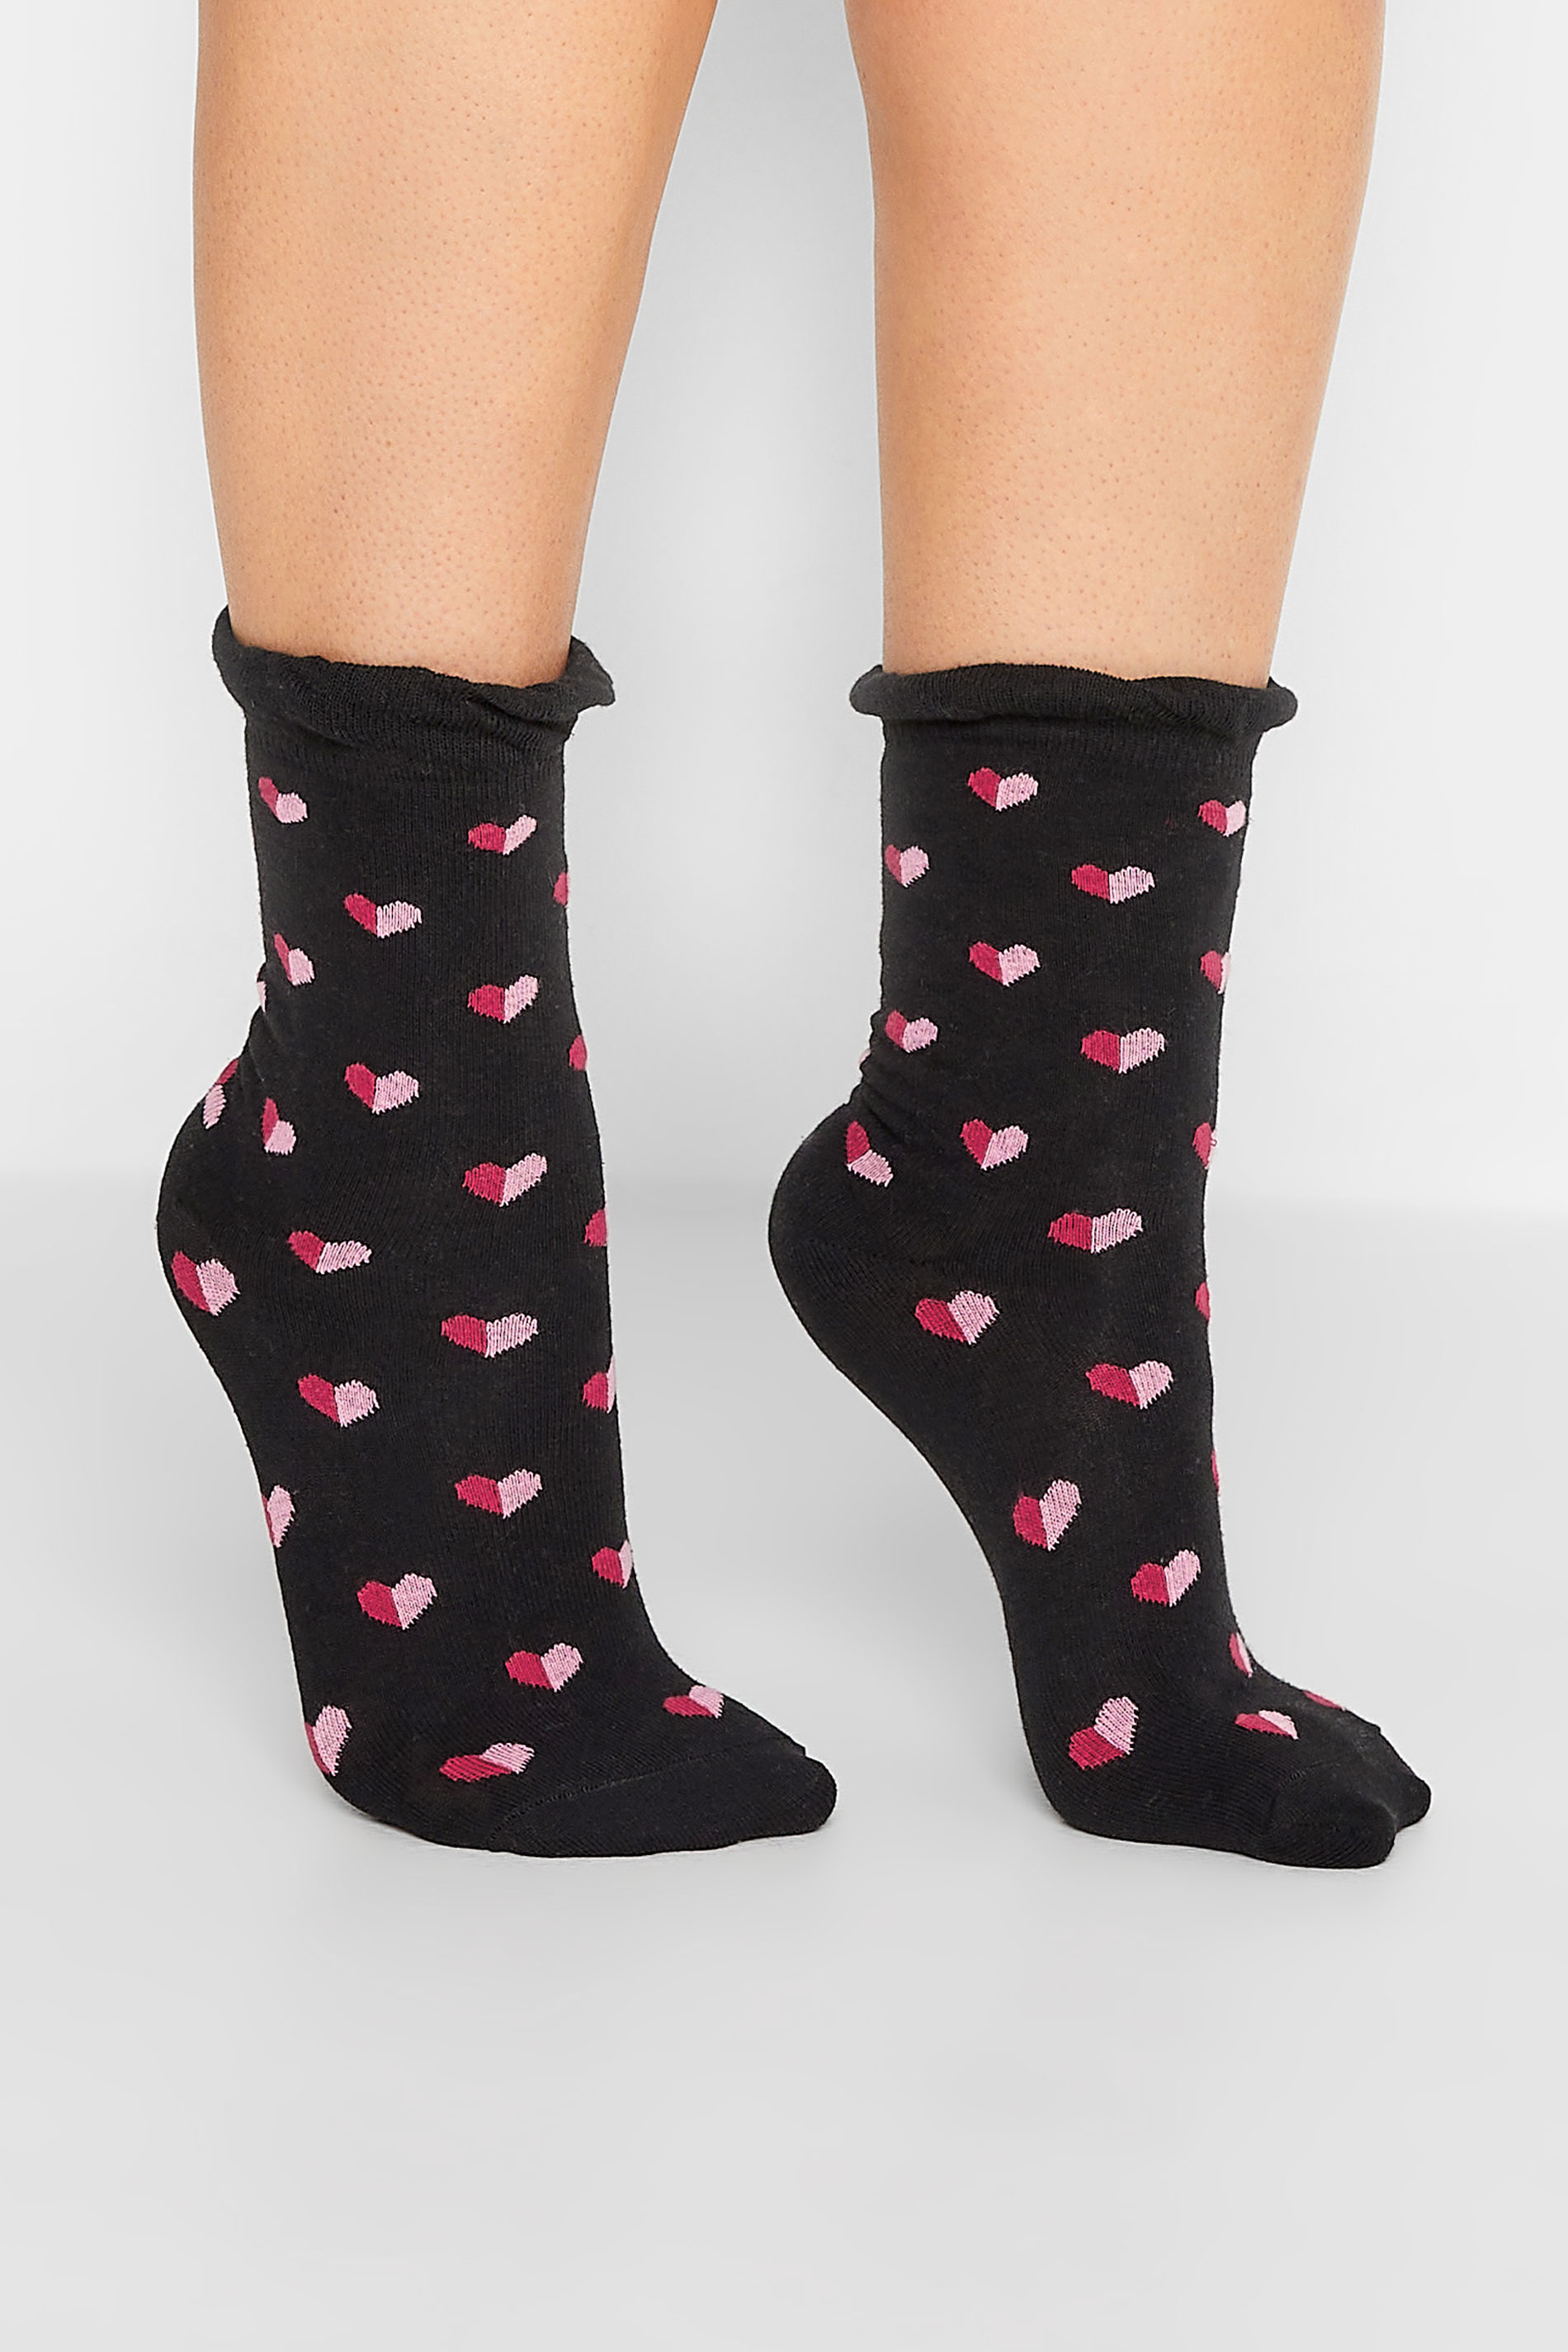 YOURS 4 PACK Black & Pink Heart Print Ankle Socks | Yours Clothing 2